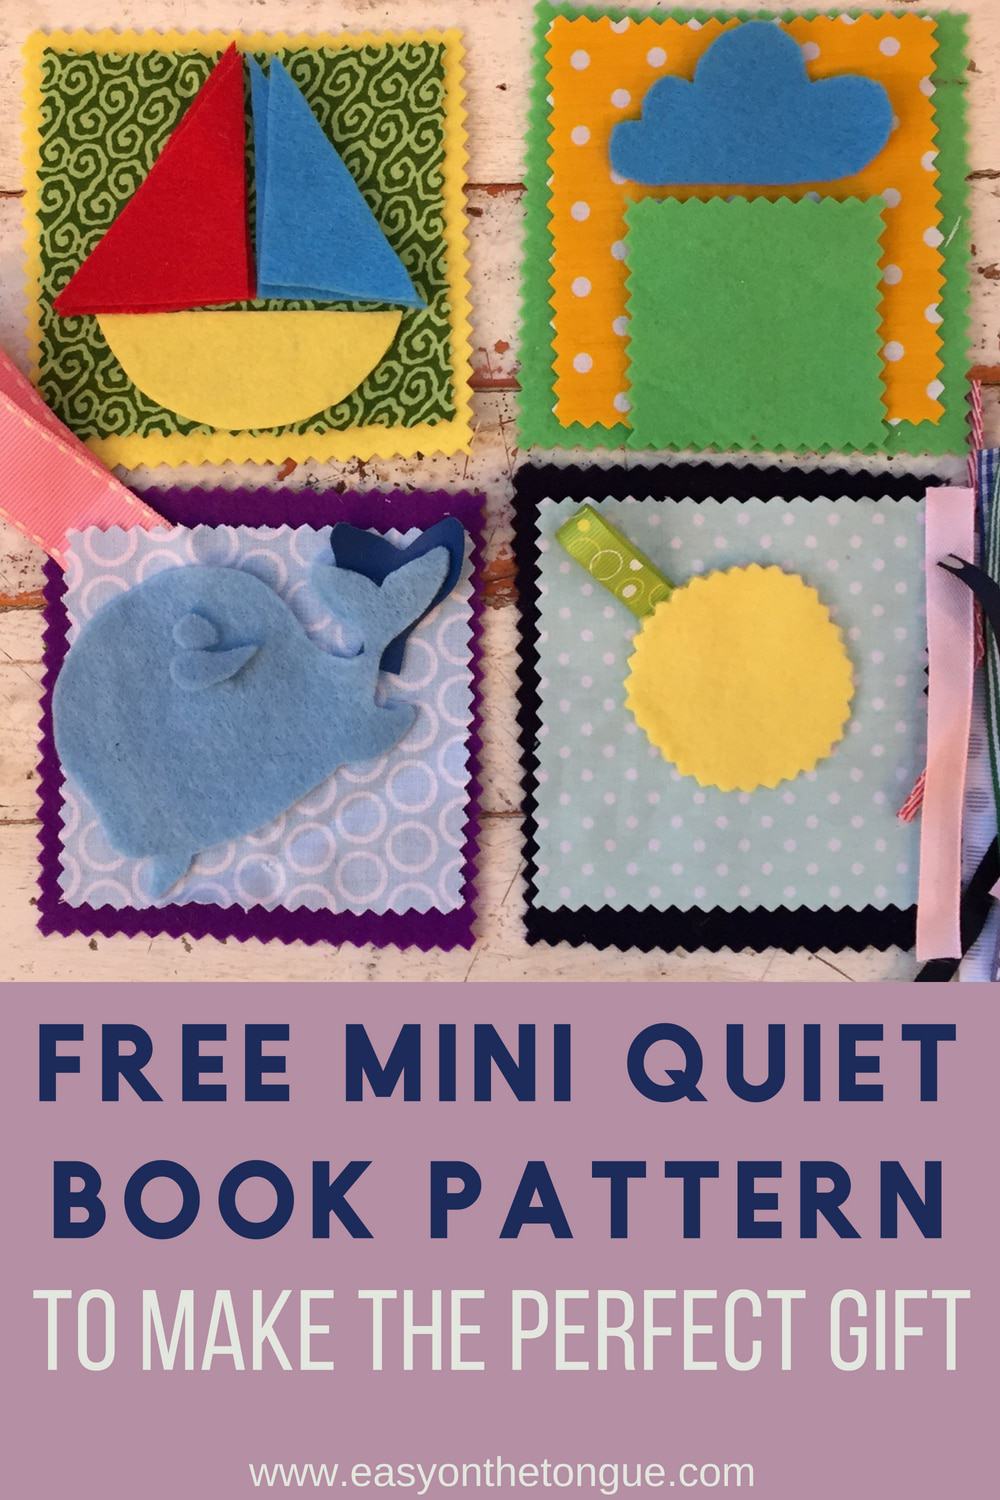 Free Mini Quiet Book Pattern to make the perfect gift quietbook quietbookpattern miniquietbook sensorypages activitybook toddlerbook 1 Free Mini Quiet Book Pattern for you to Make the Perfect Gift